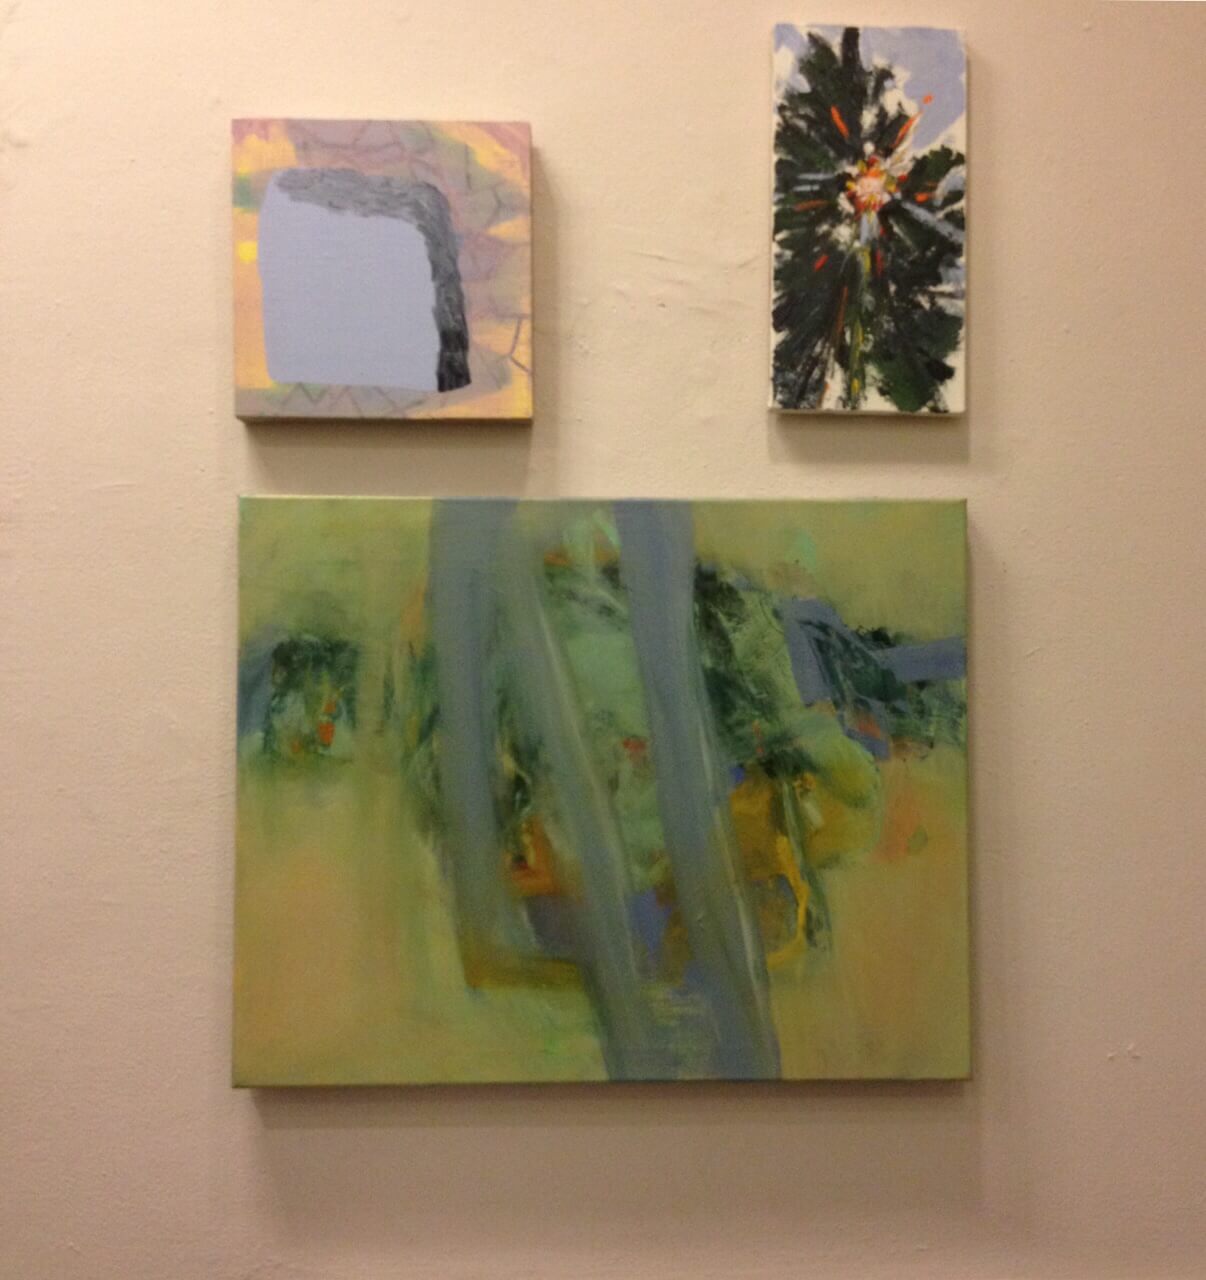 Above, left to right: Works by Becky Yazdan and Sandy Walker. Below, a work by Hollis Jeffcoat. In one of the Andrew rooms.